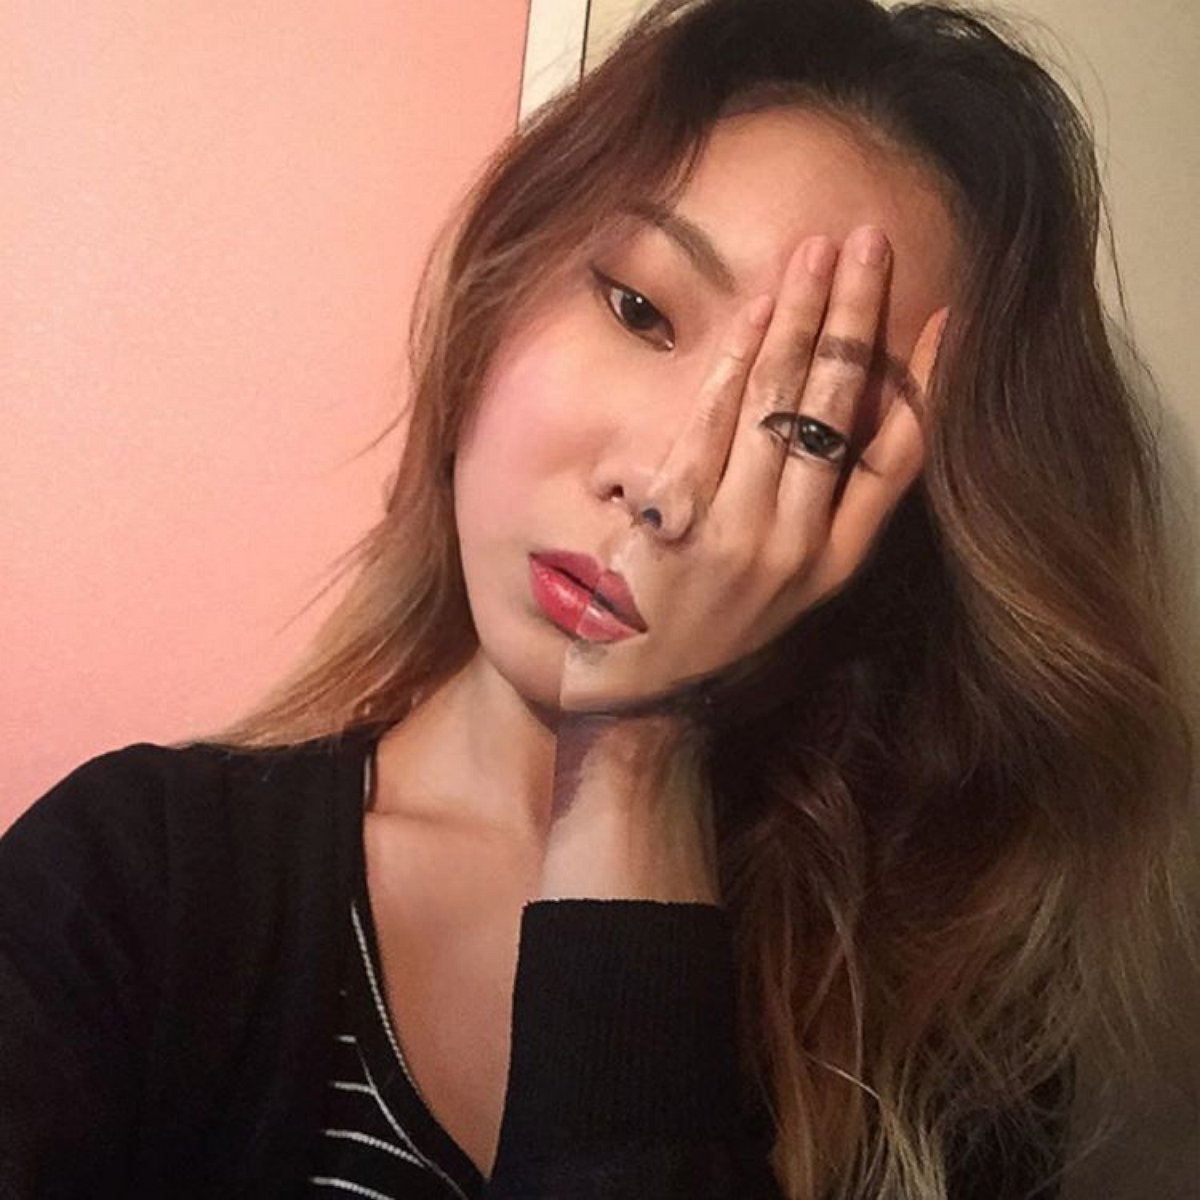 PHOTO: Dain Yoon, a 22-year-old student from South Korea, has wowed the Internet thanks to her visual illusions.